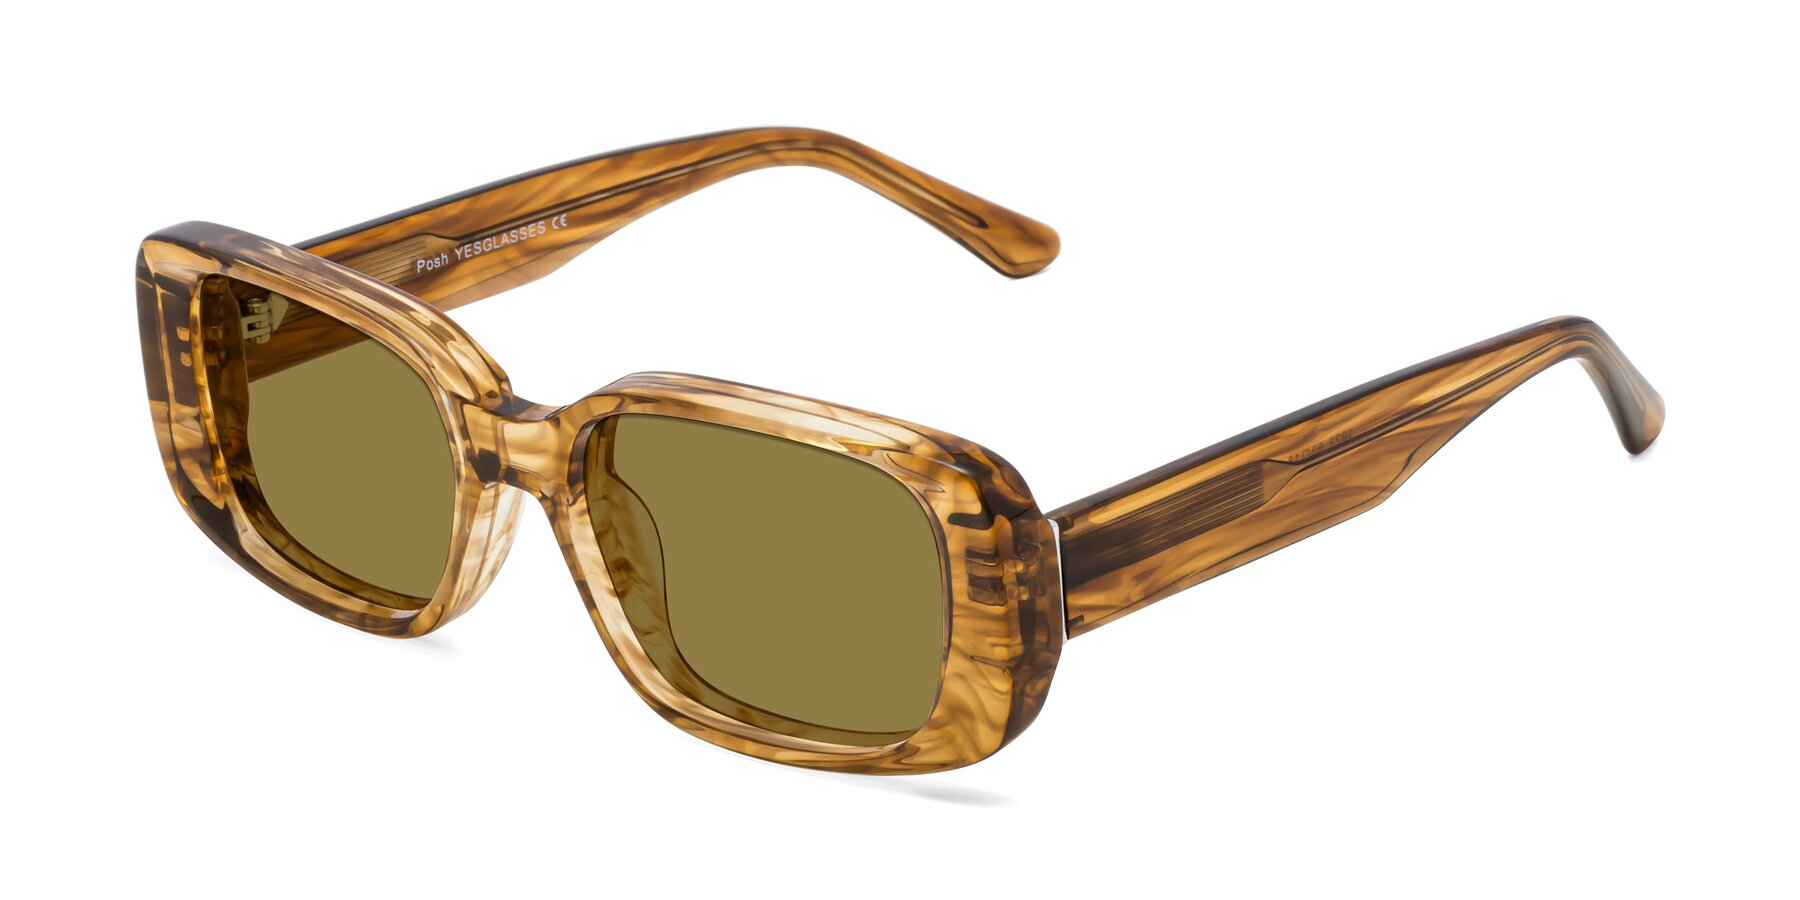 Angle of Posh in Stripe Amber with Brown Polarized Lenses